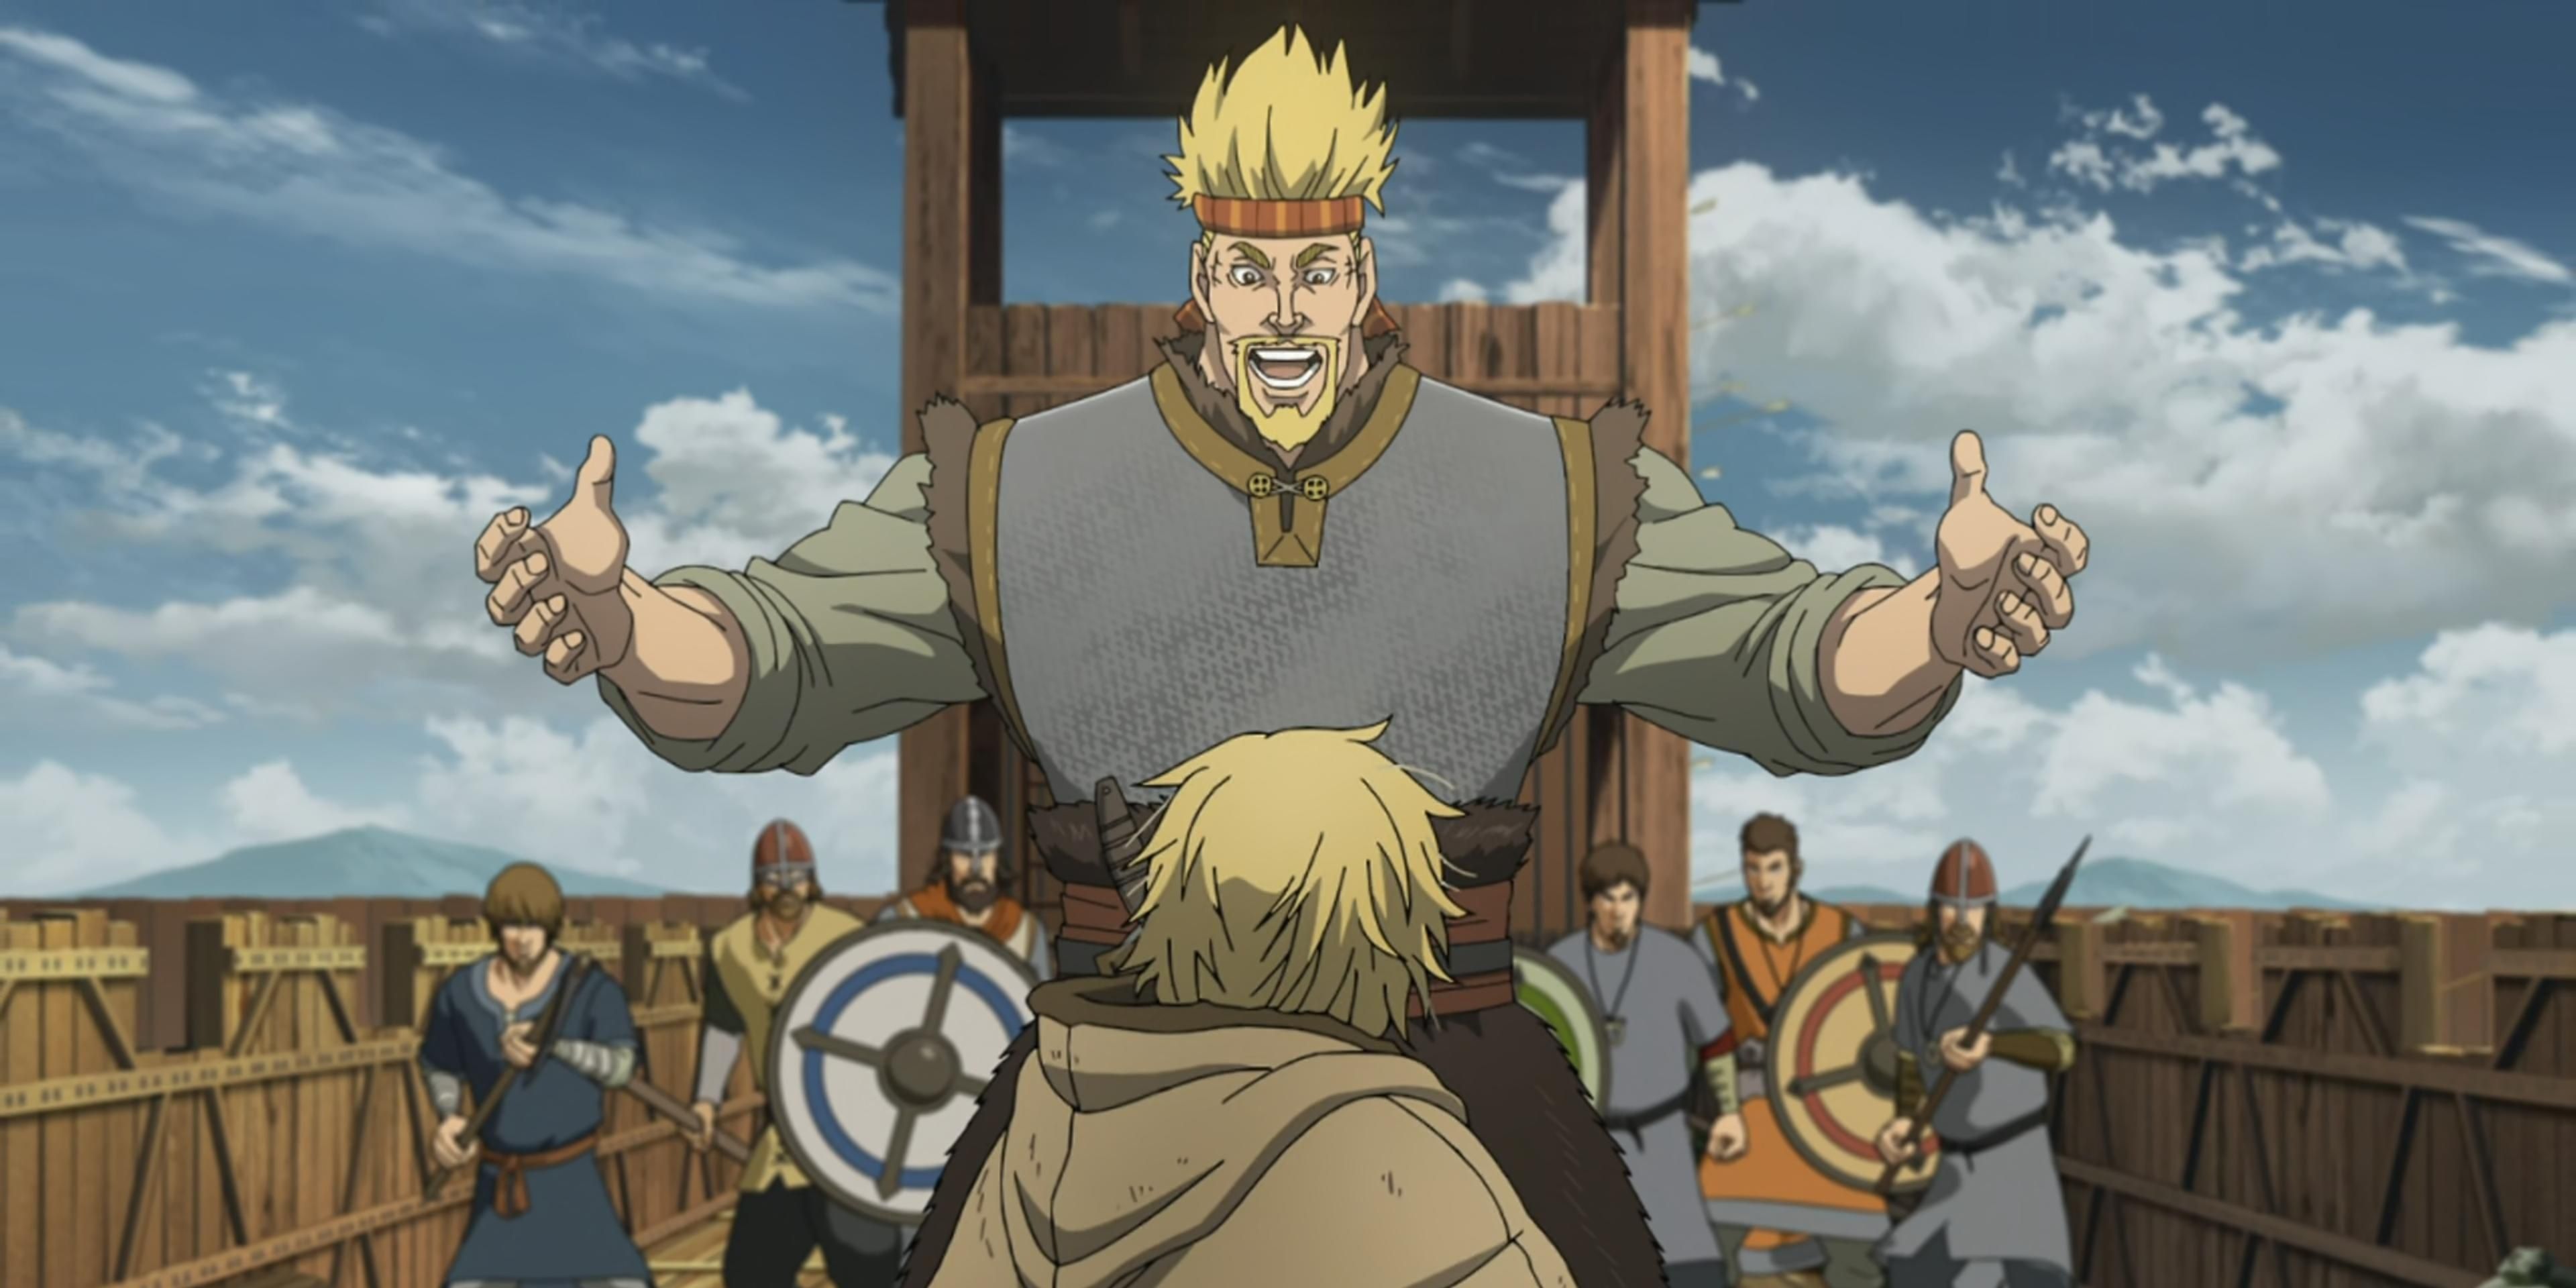 Thorkell the Tall in Vinland Saga